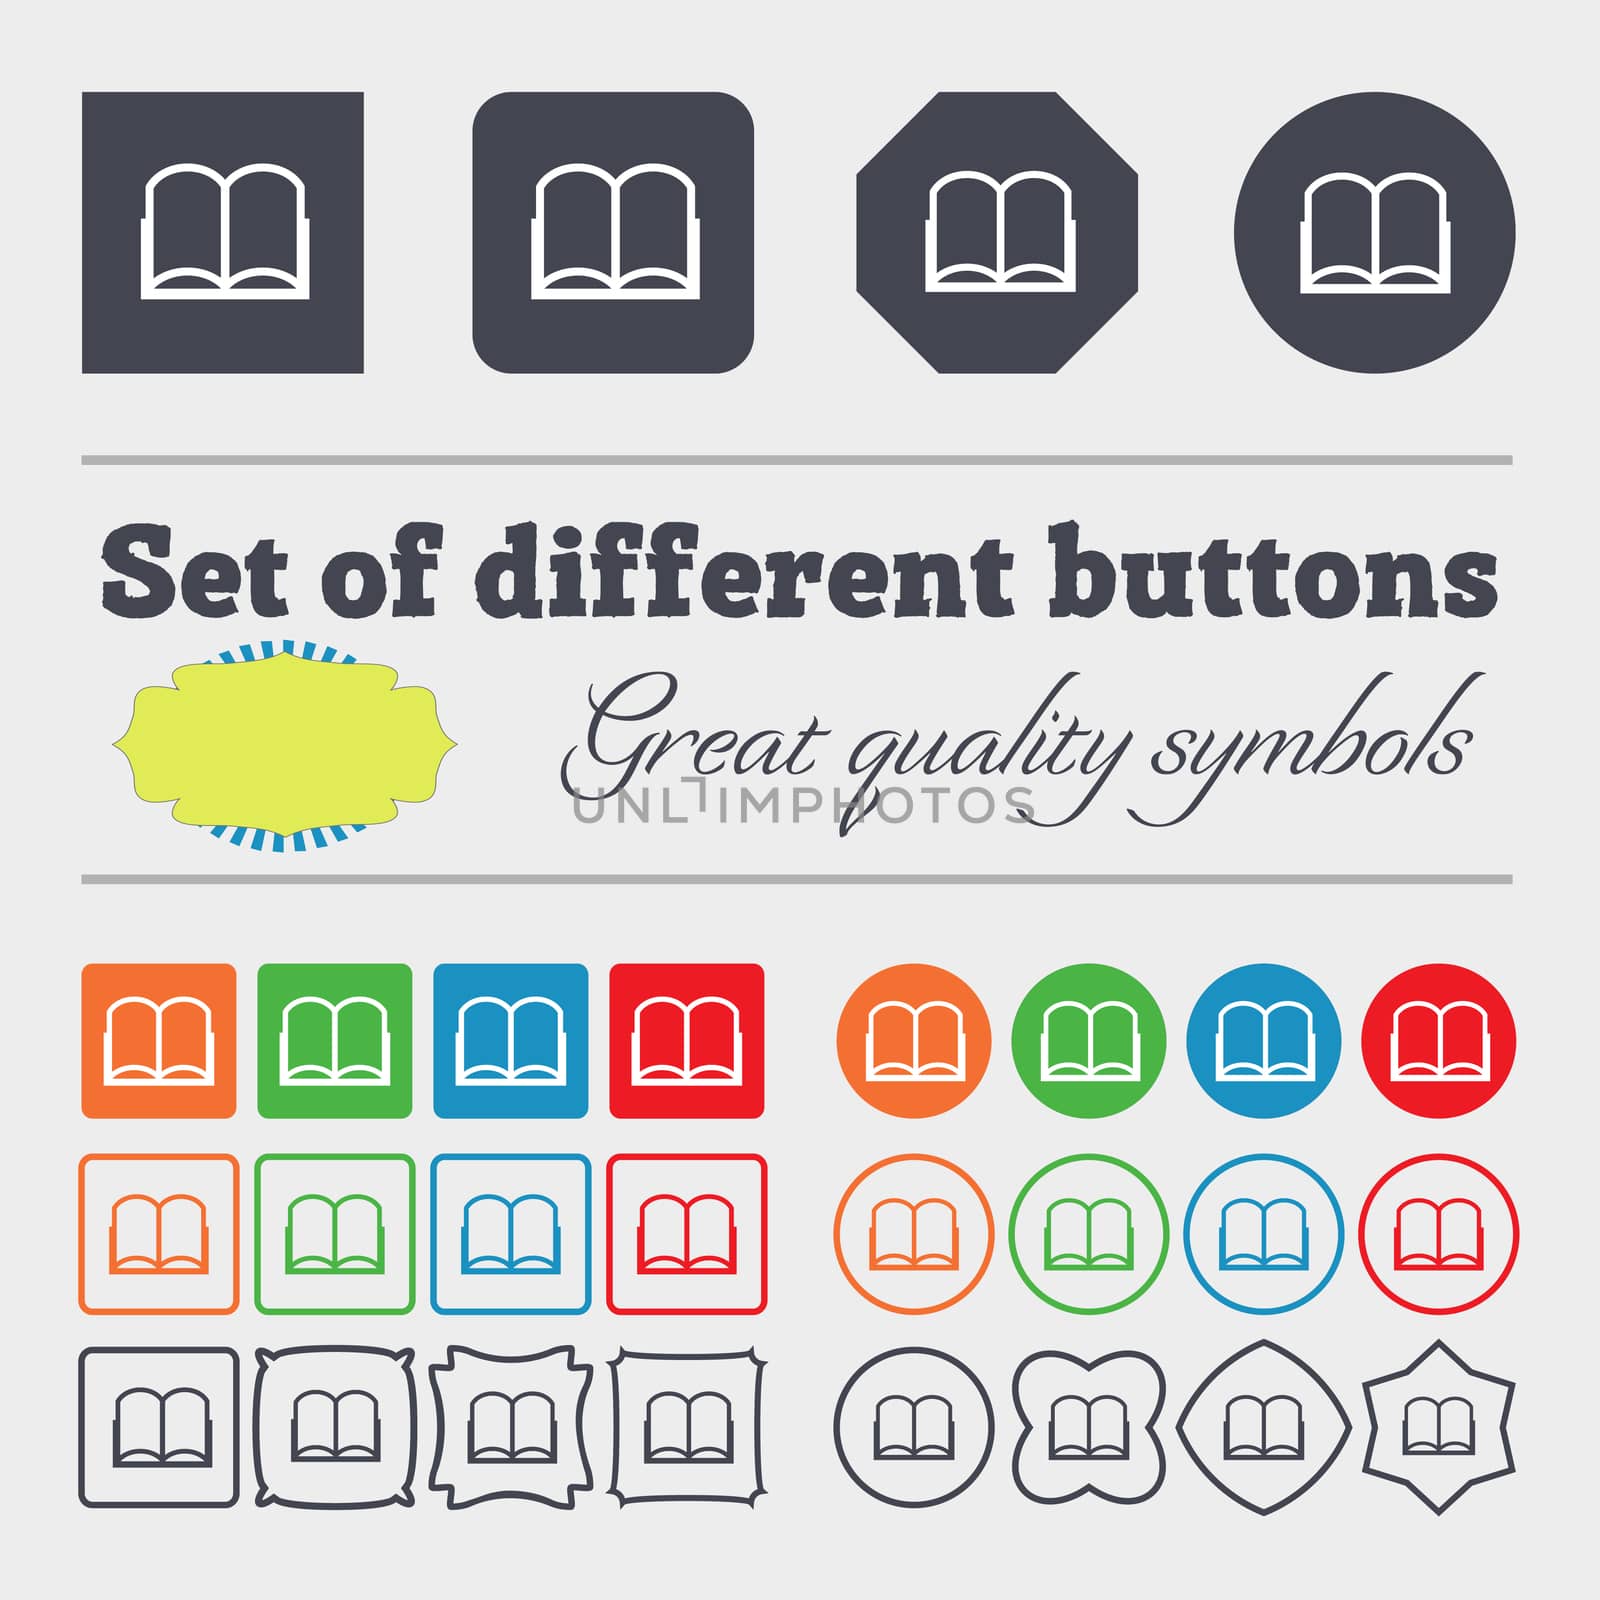 Book sign icon. Open book symbol. Big set of colorful, diverse, high-quality buttons. illustration